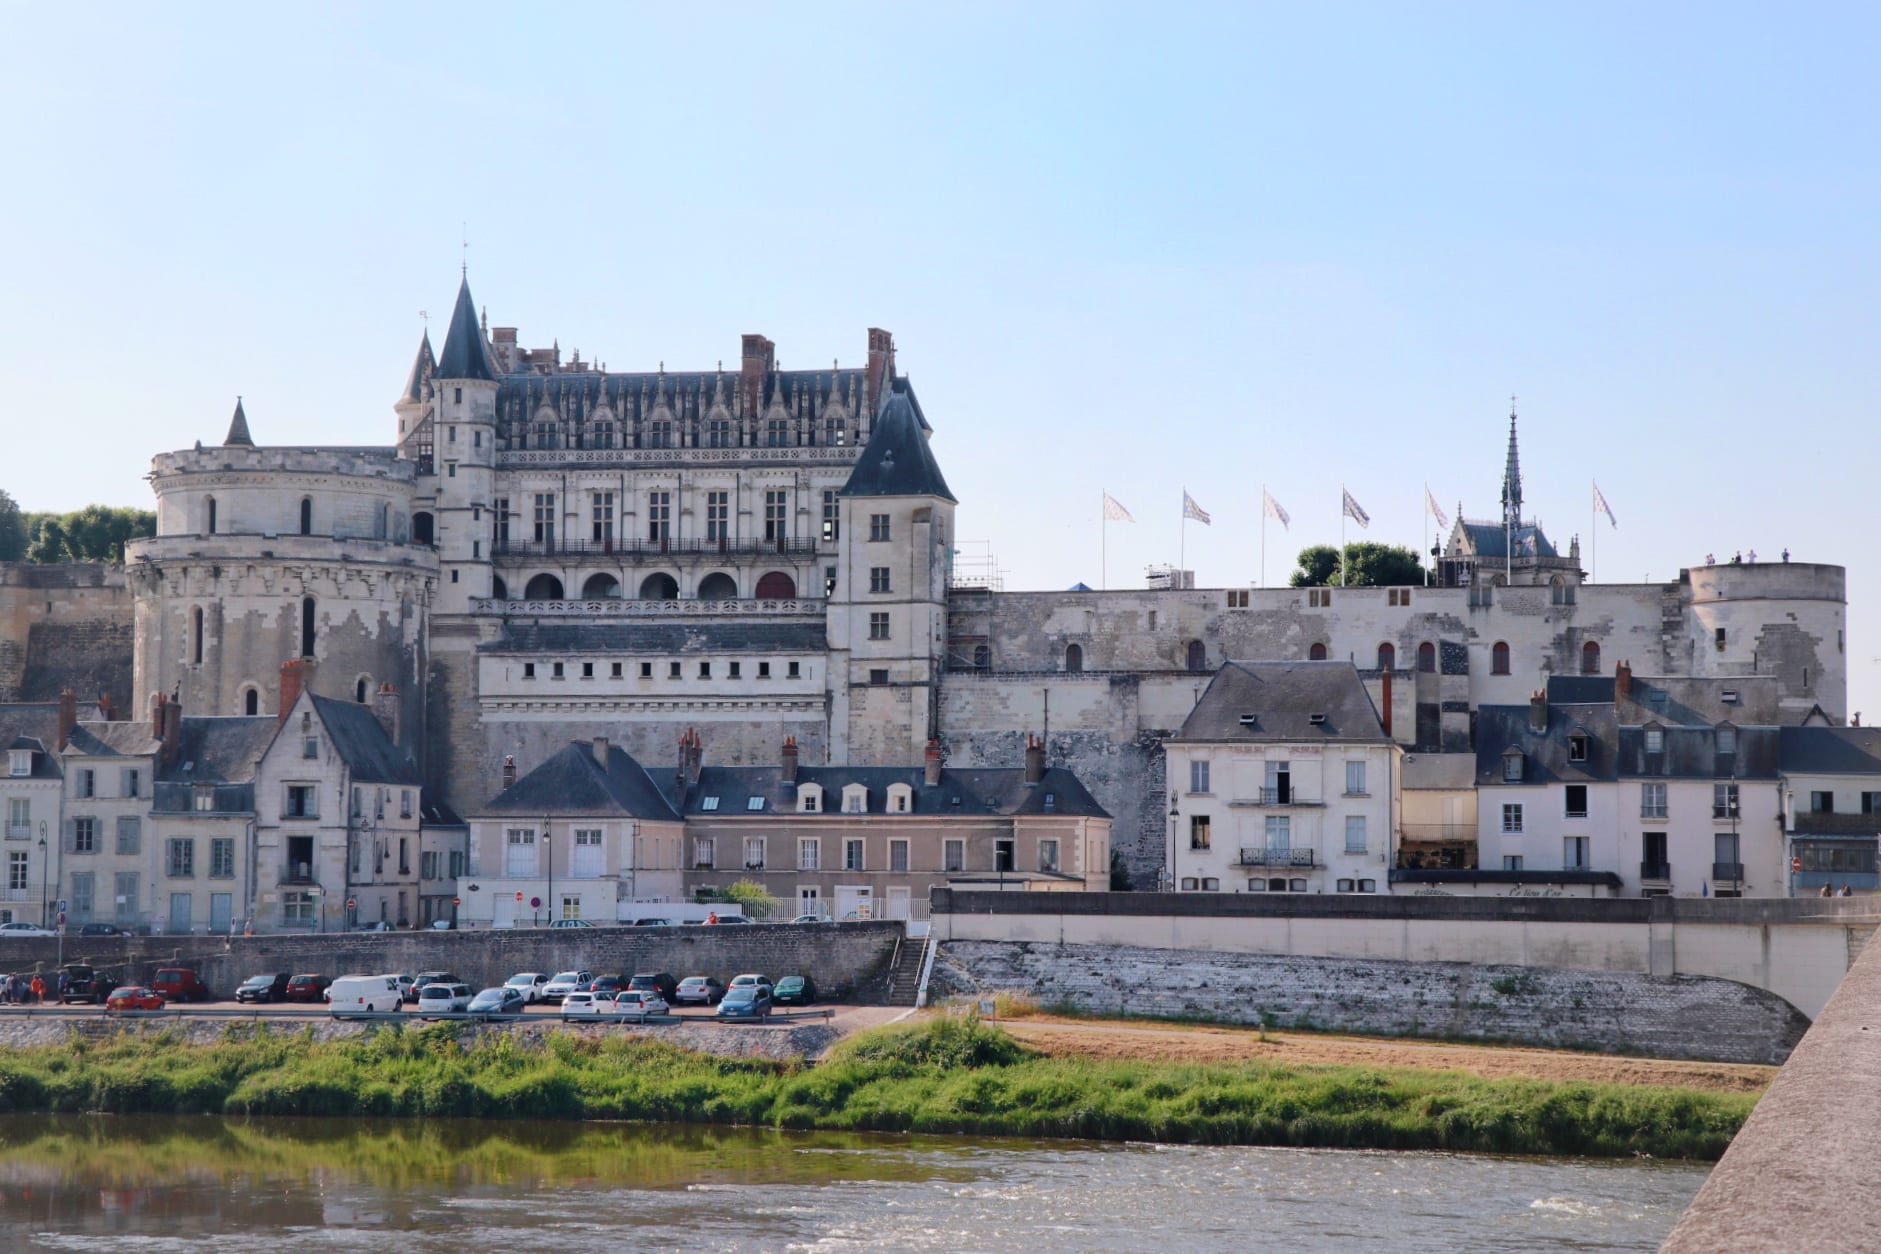 Loire Valley scenic route driving itinerary from Paris by car: Château d'Amboise